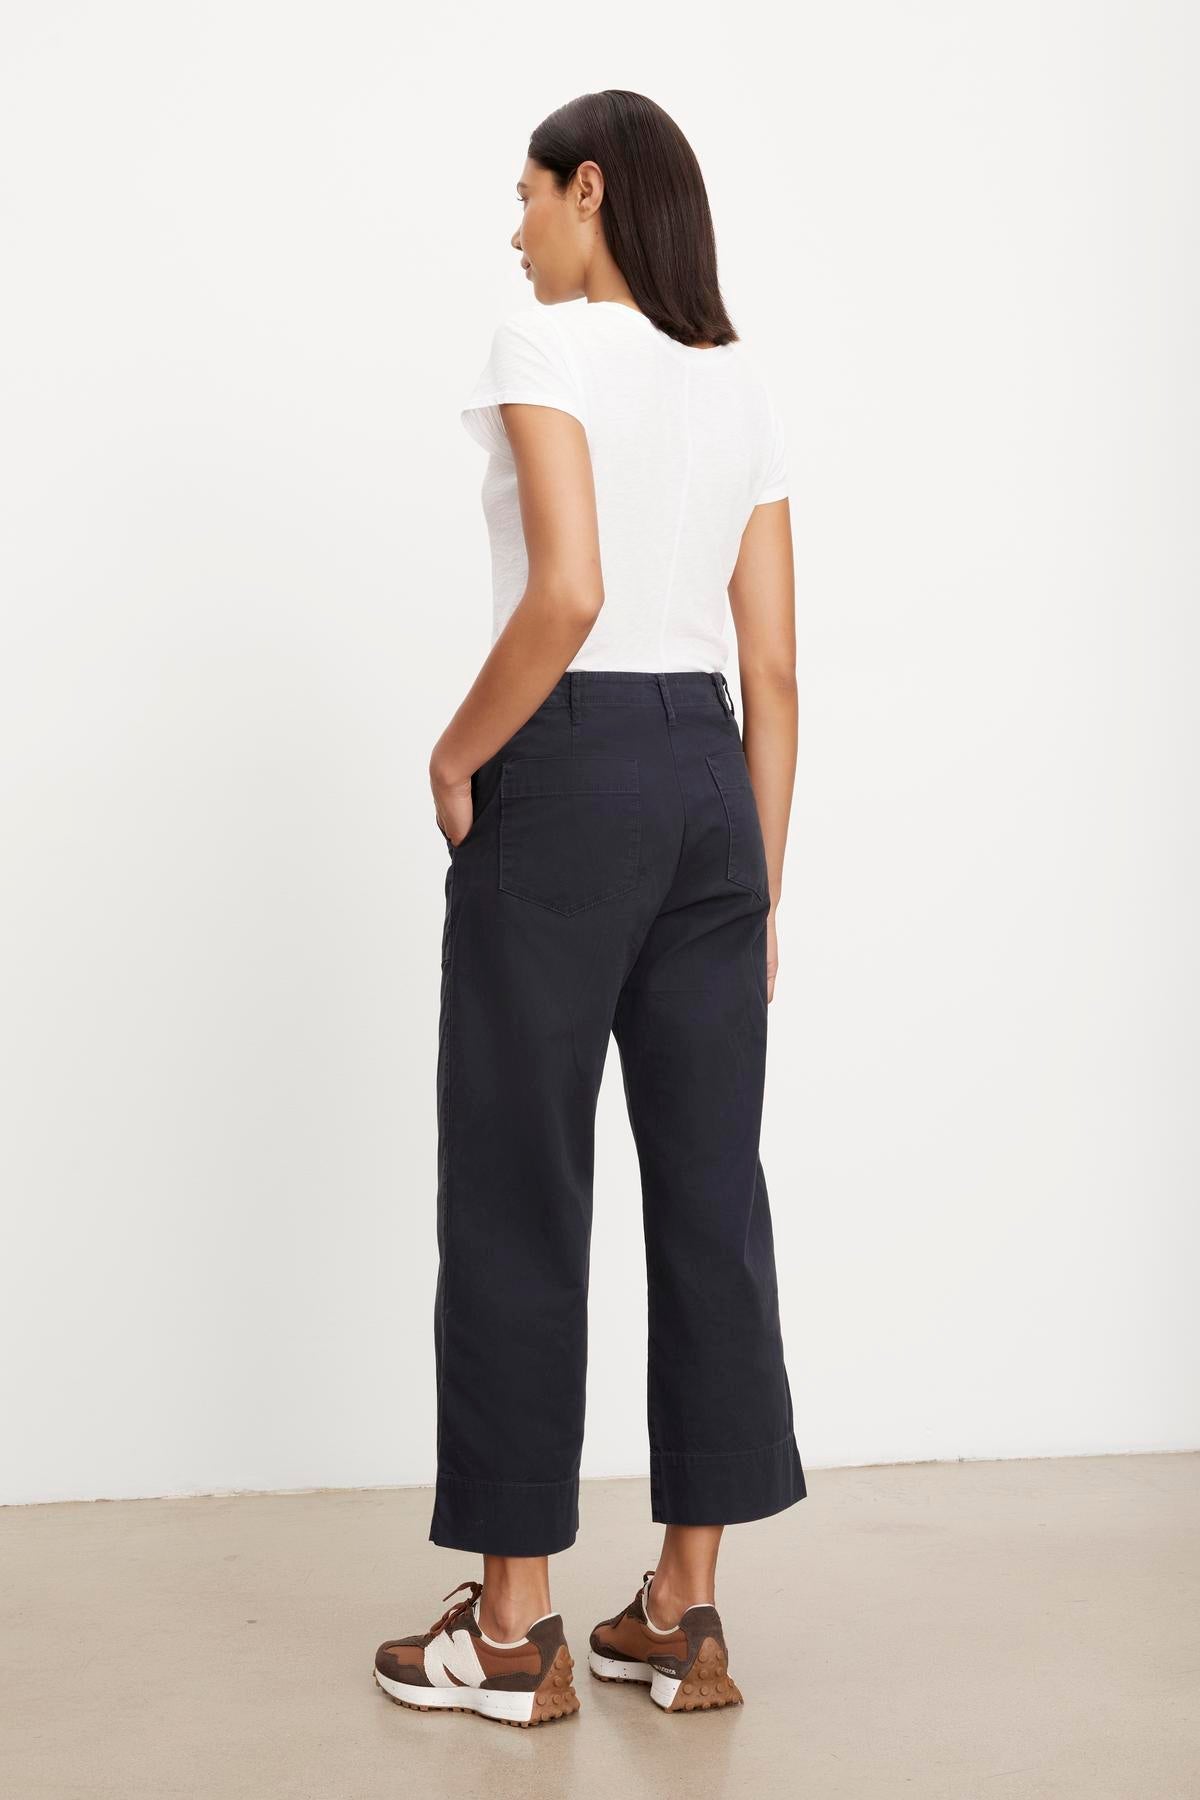   Woman standing in a white top and dark Velvet by Graham & Spencer MYA COTTON CANVAS PANT, viewed from the side. 